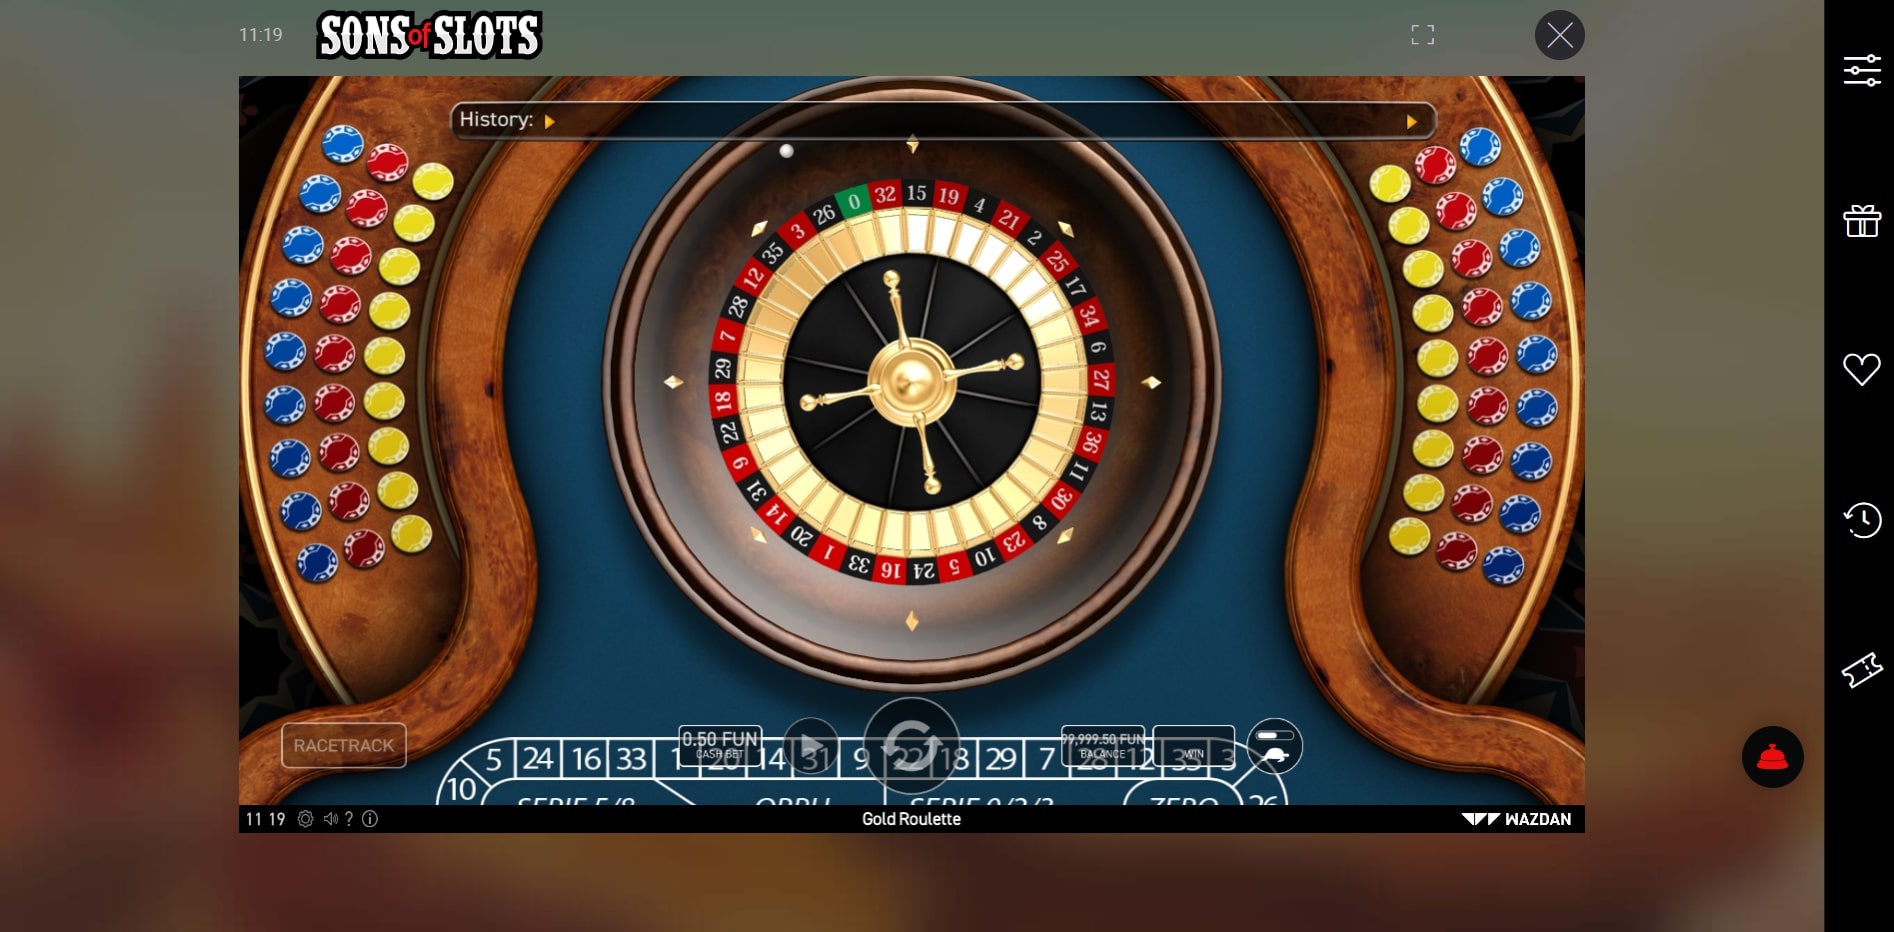 Sons of Slots Casino Games